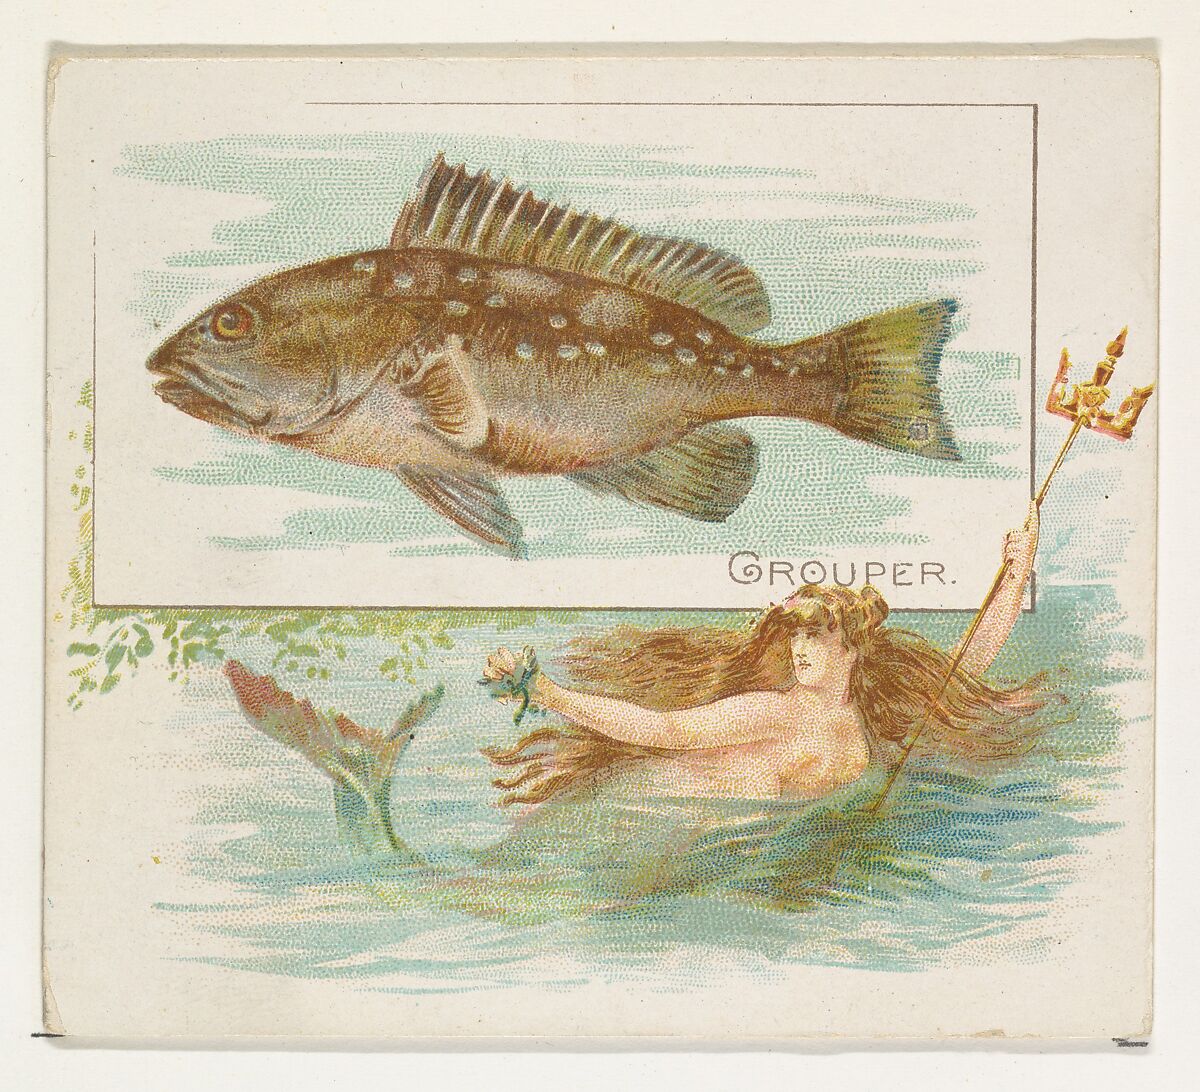 Grouper, from Fish from American Waters series (N39) for Allen & Ginter Cigarettes, Issued by Allen &amp; Ginter (American, Richmond, Virginia), Commercial color lithograph 